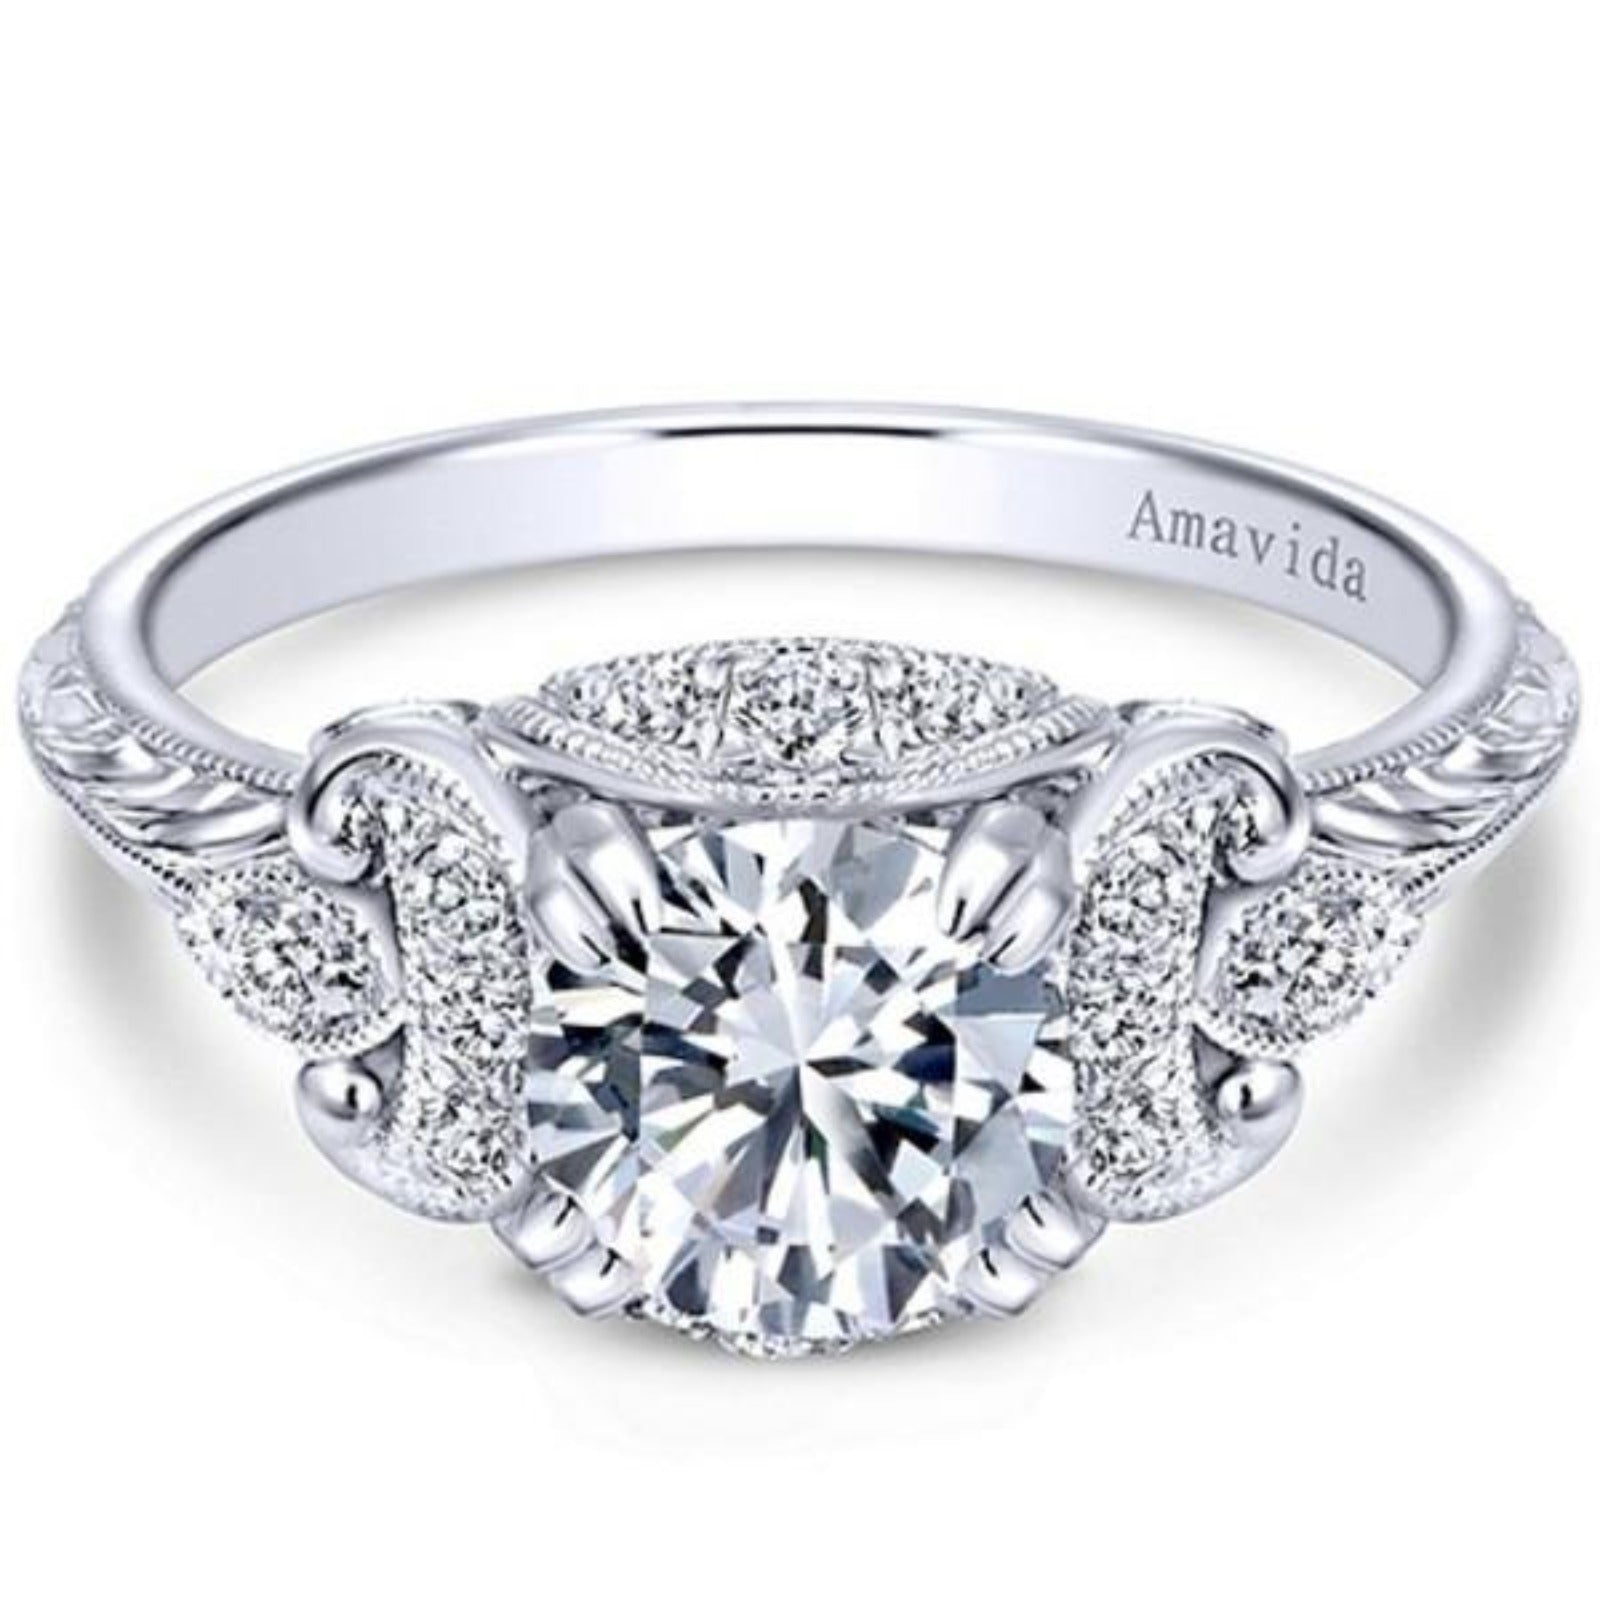 Vintage Halo Engagement Ring With Diamond Accents : 41166 : Arden Jewelers